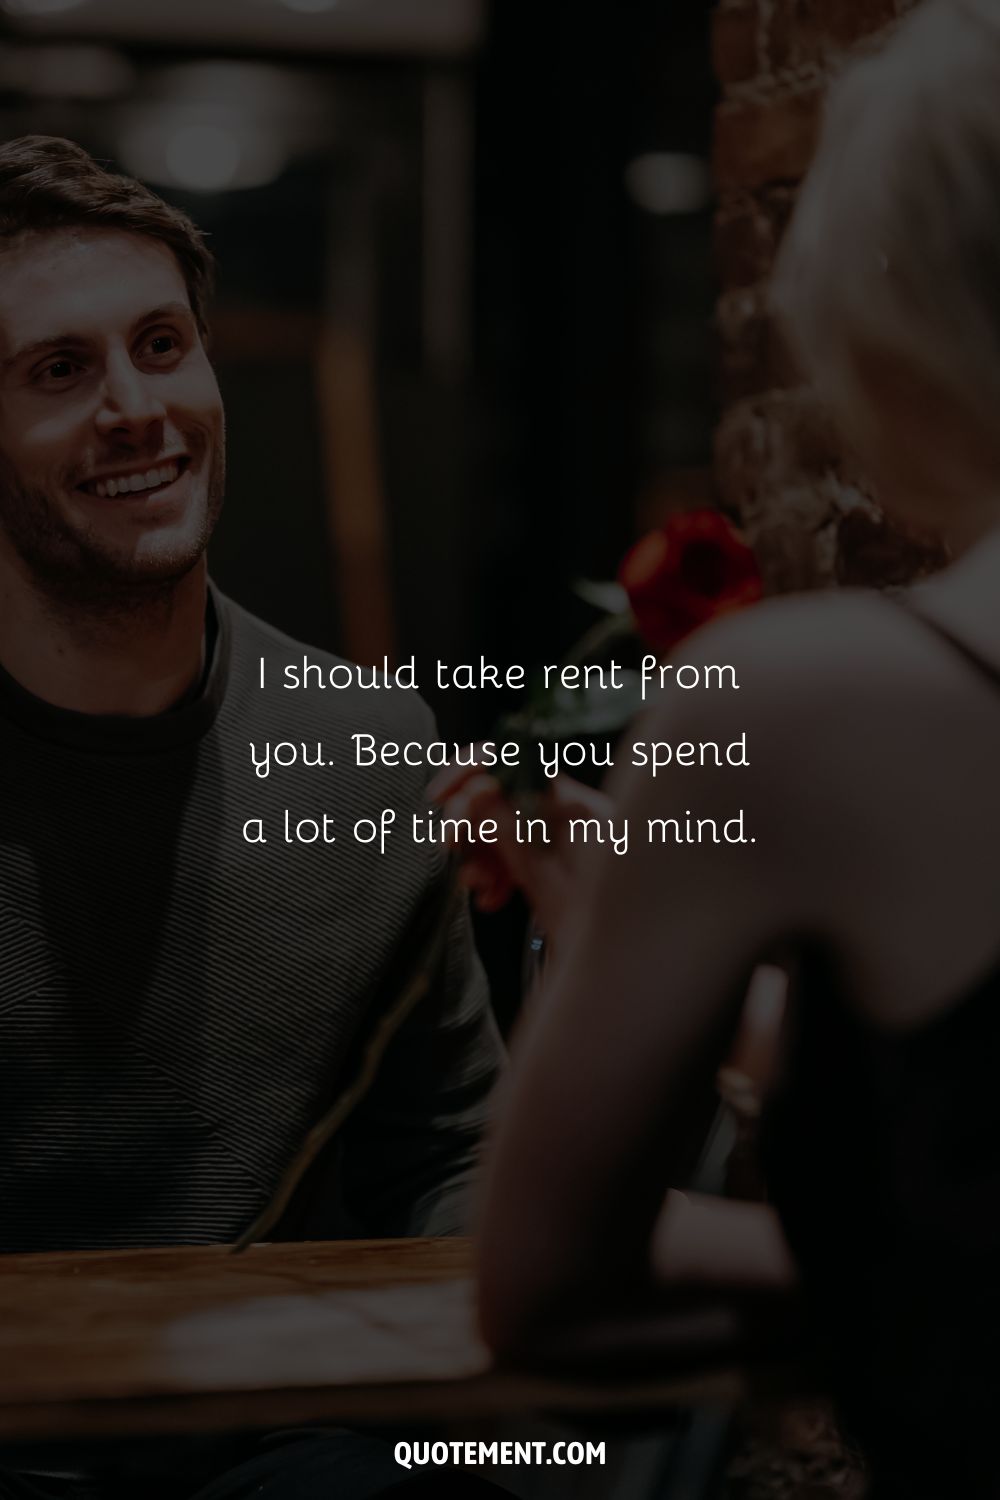 I should take rent from you. Because you spend a lot of time in my mind.